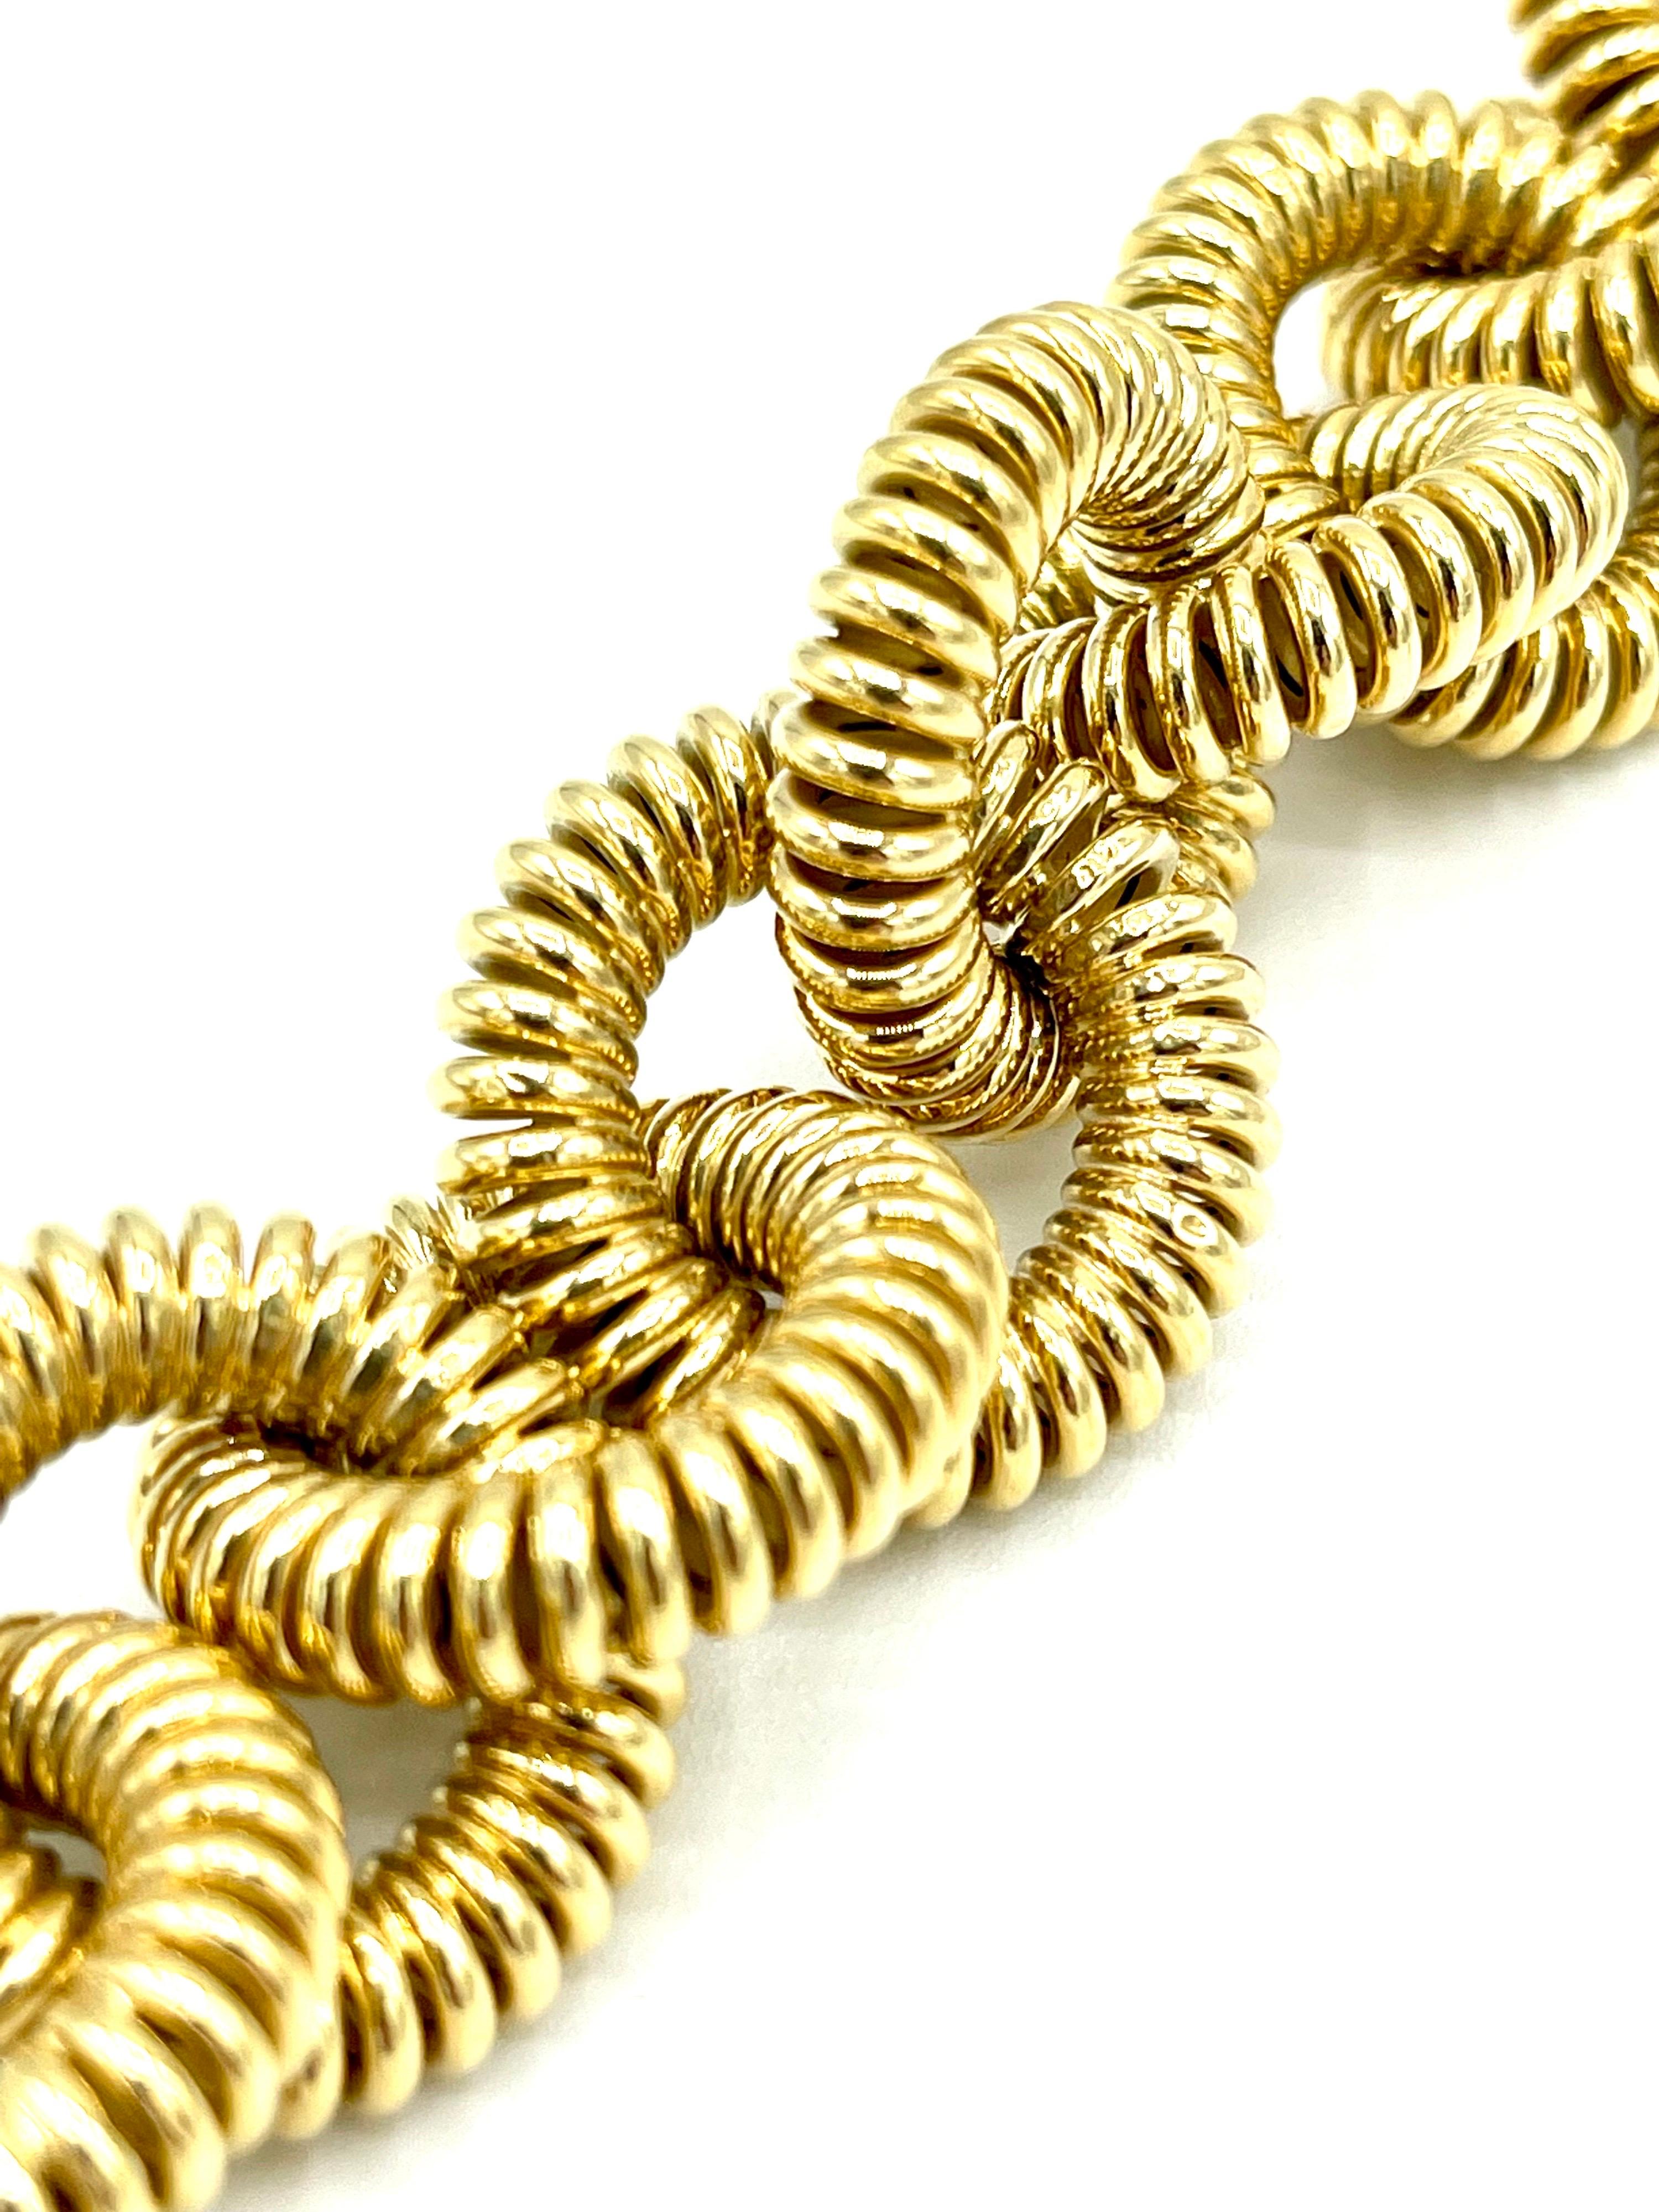 A beautiful polished 18K yellow gold bracelet.  The 1.00 inch circular links are designed in a spiral pattern, giving this bracelet a very unique look.  This bracelet features a very easy to use spring loaded clasp that simply connects to the last